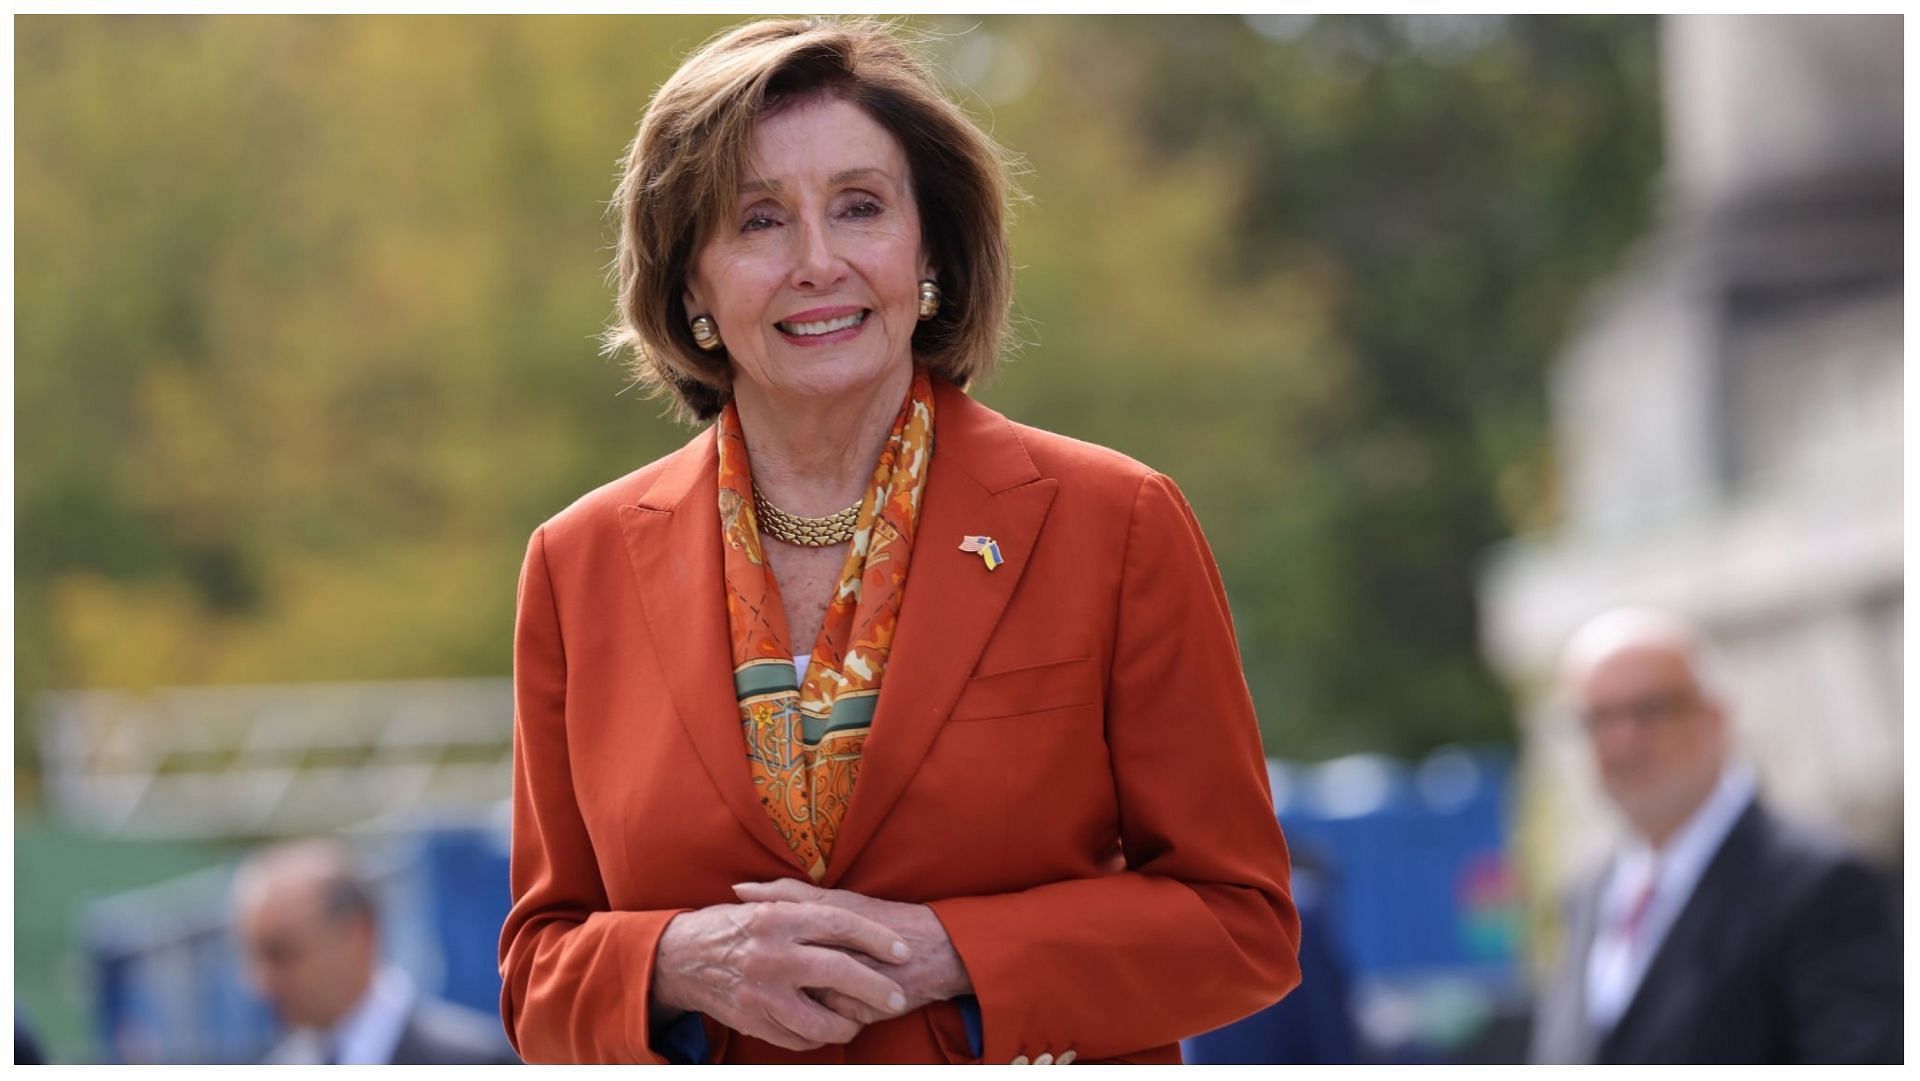 Nancy Pelosi spoke about climate change and cutting carbon emissions at the event (Image via Sean Gallup/Getty Images)